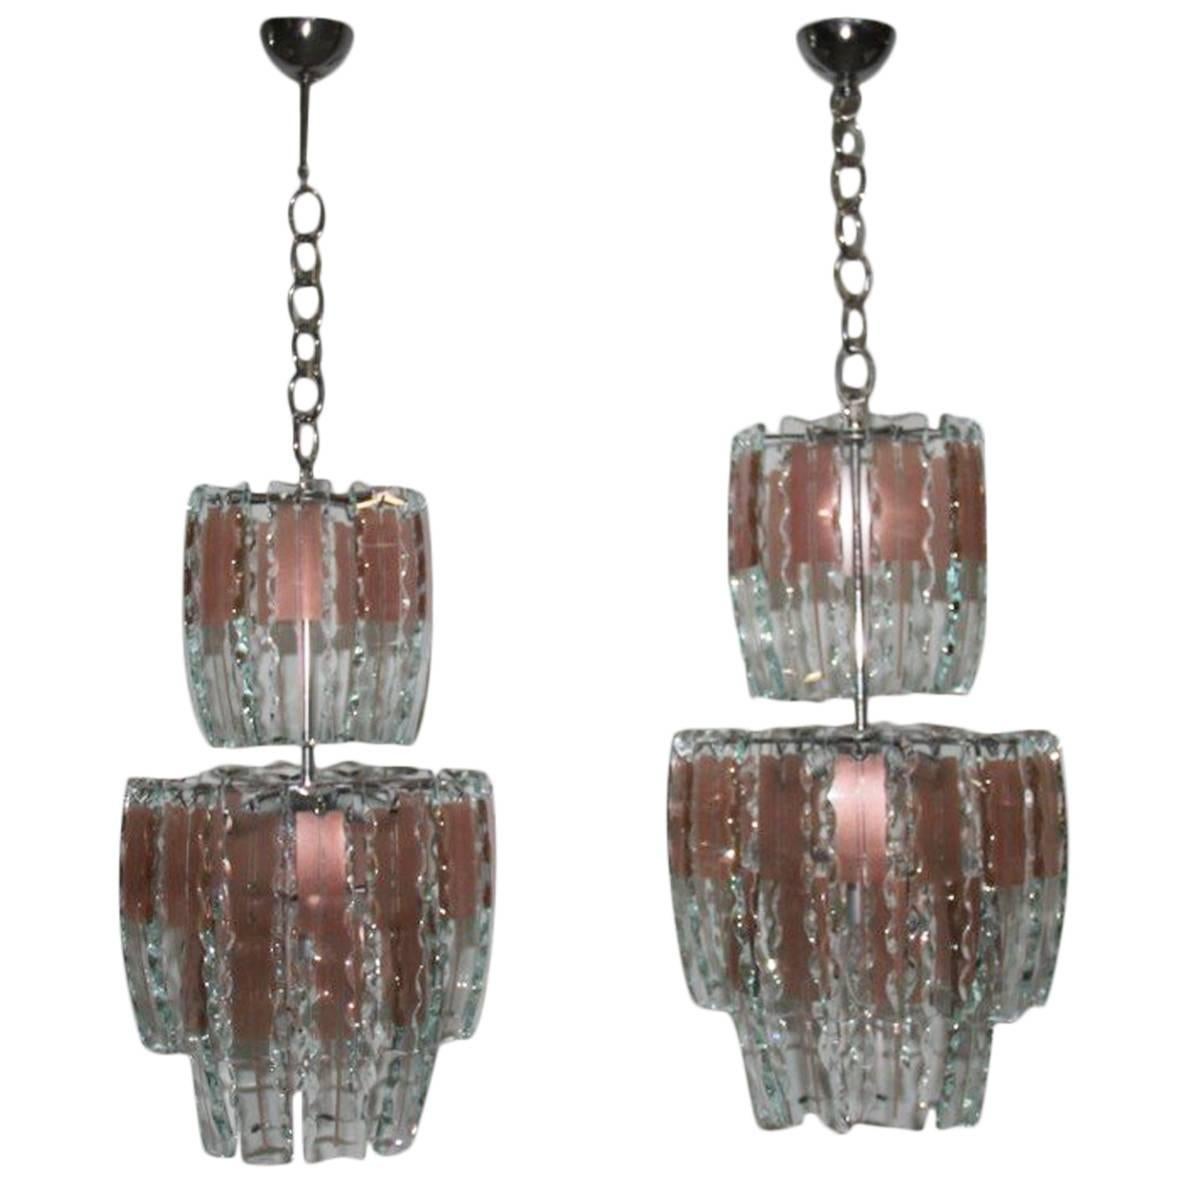 Pair of Chandelier Curved Glass, 1970s, Crystall, Steel, Italian Design Chipped For Sale